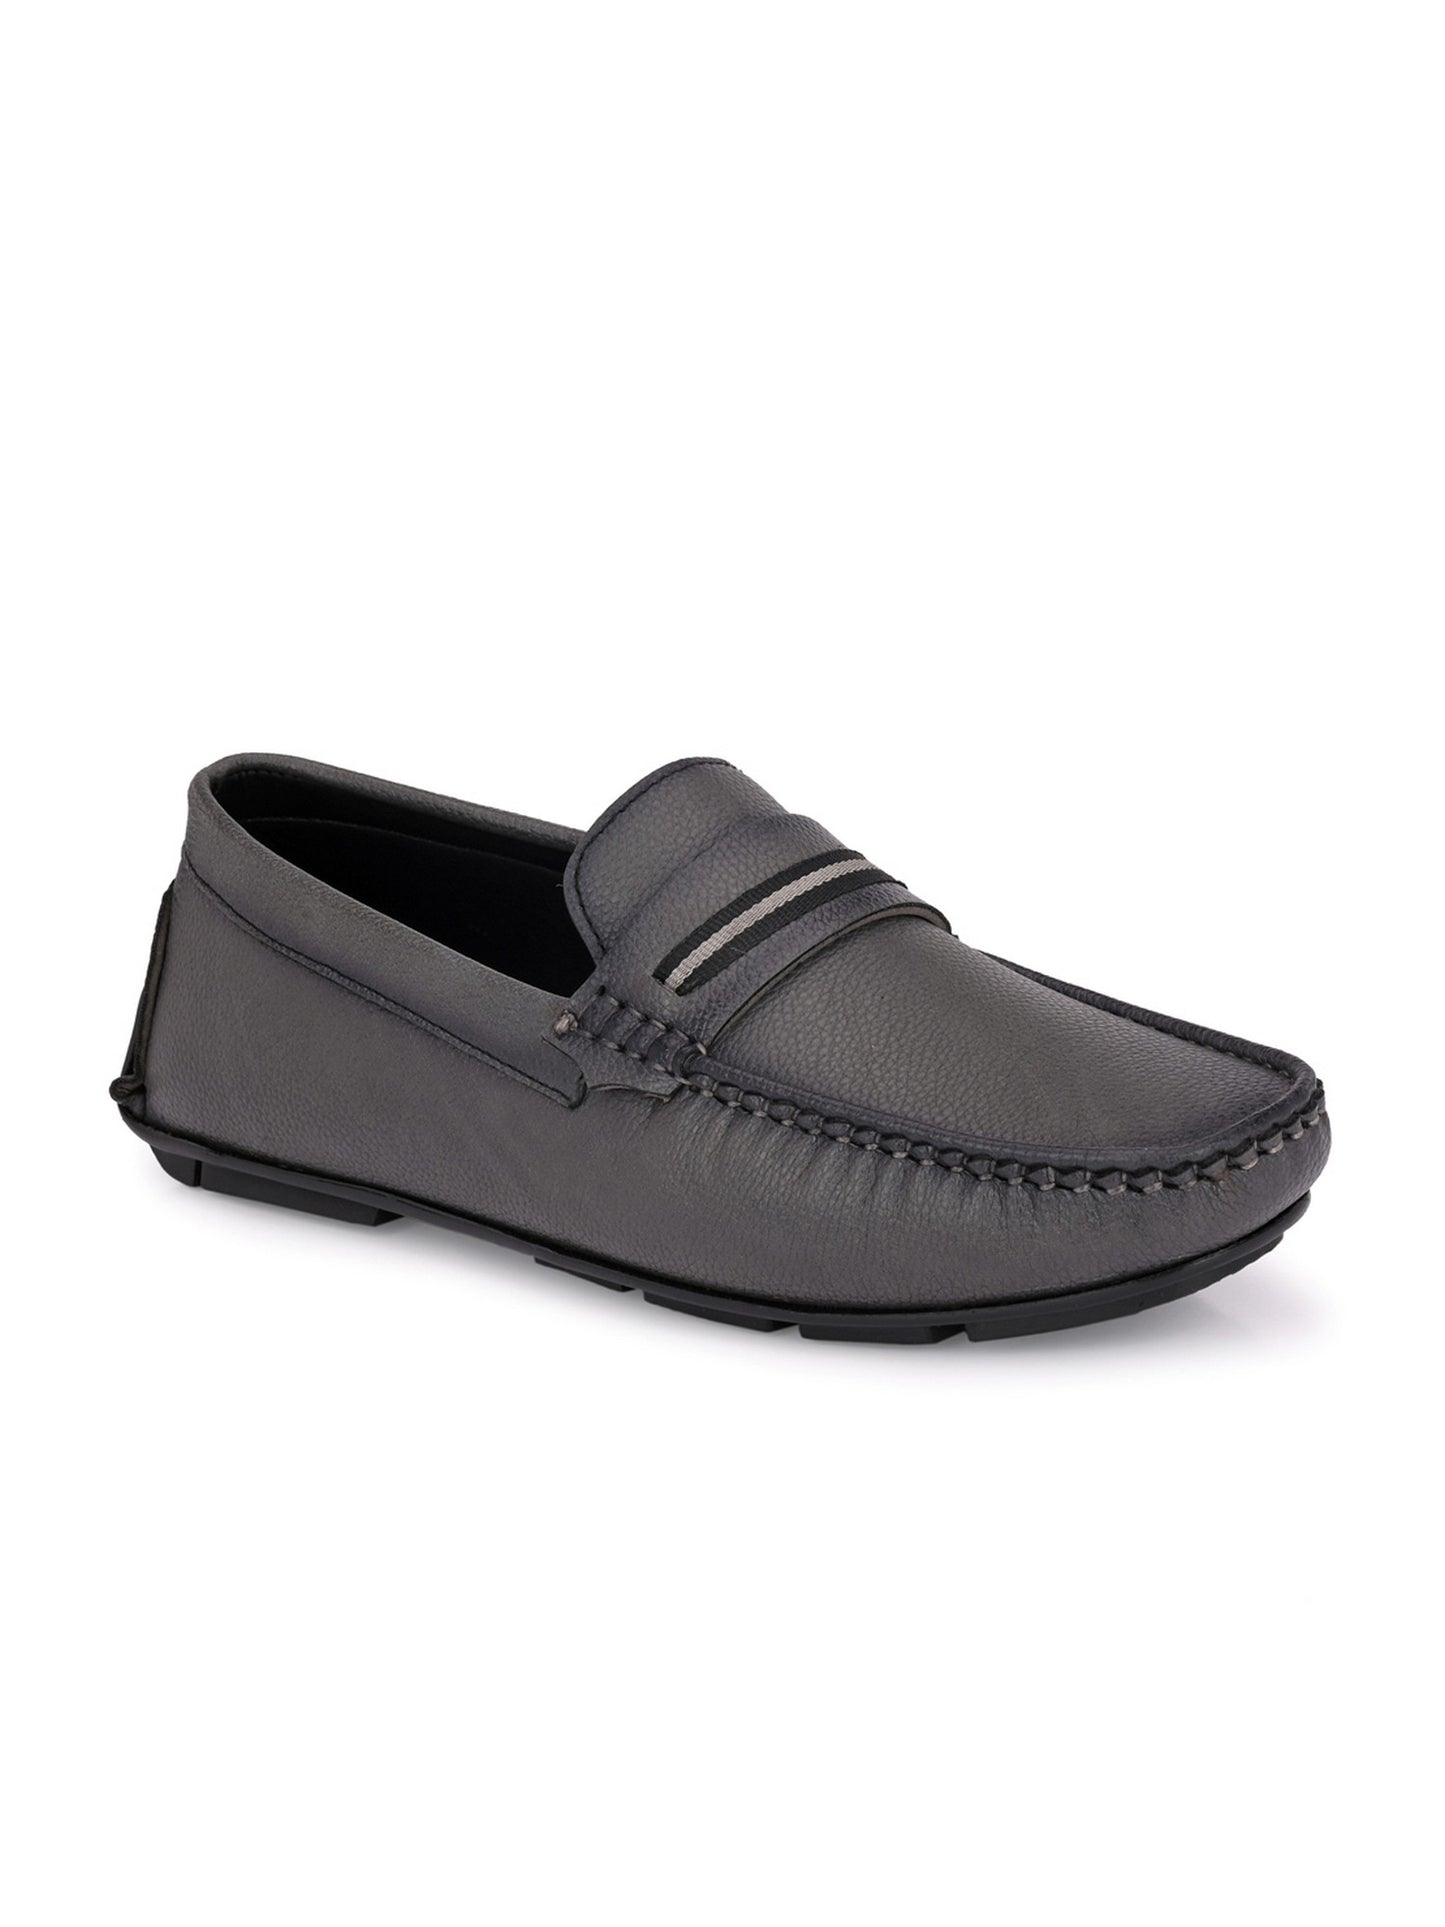 Guava Men's Grey Casual Slip On Driving Loafers (GV15JA786)